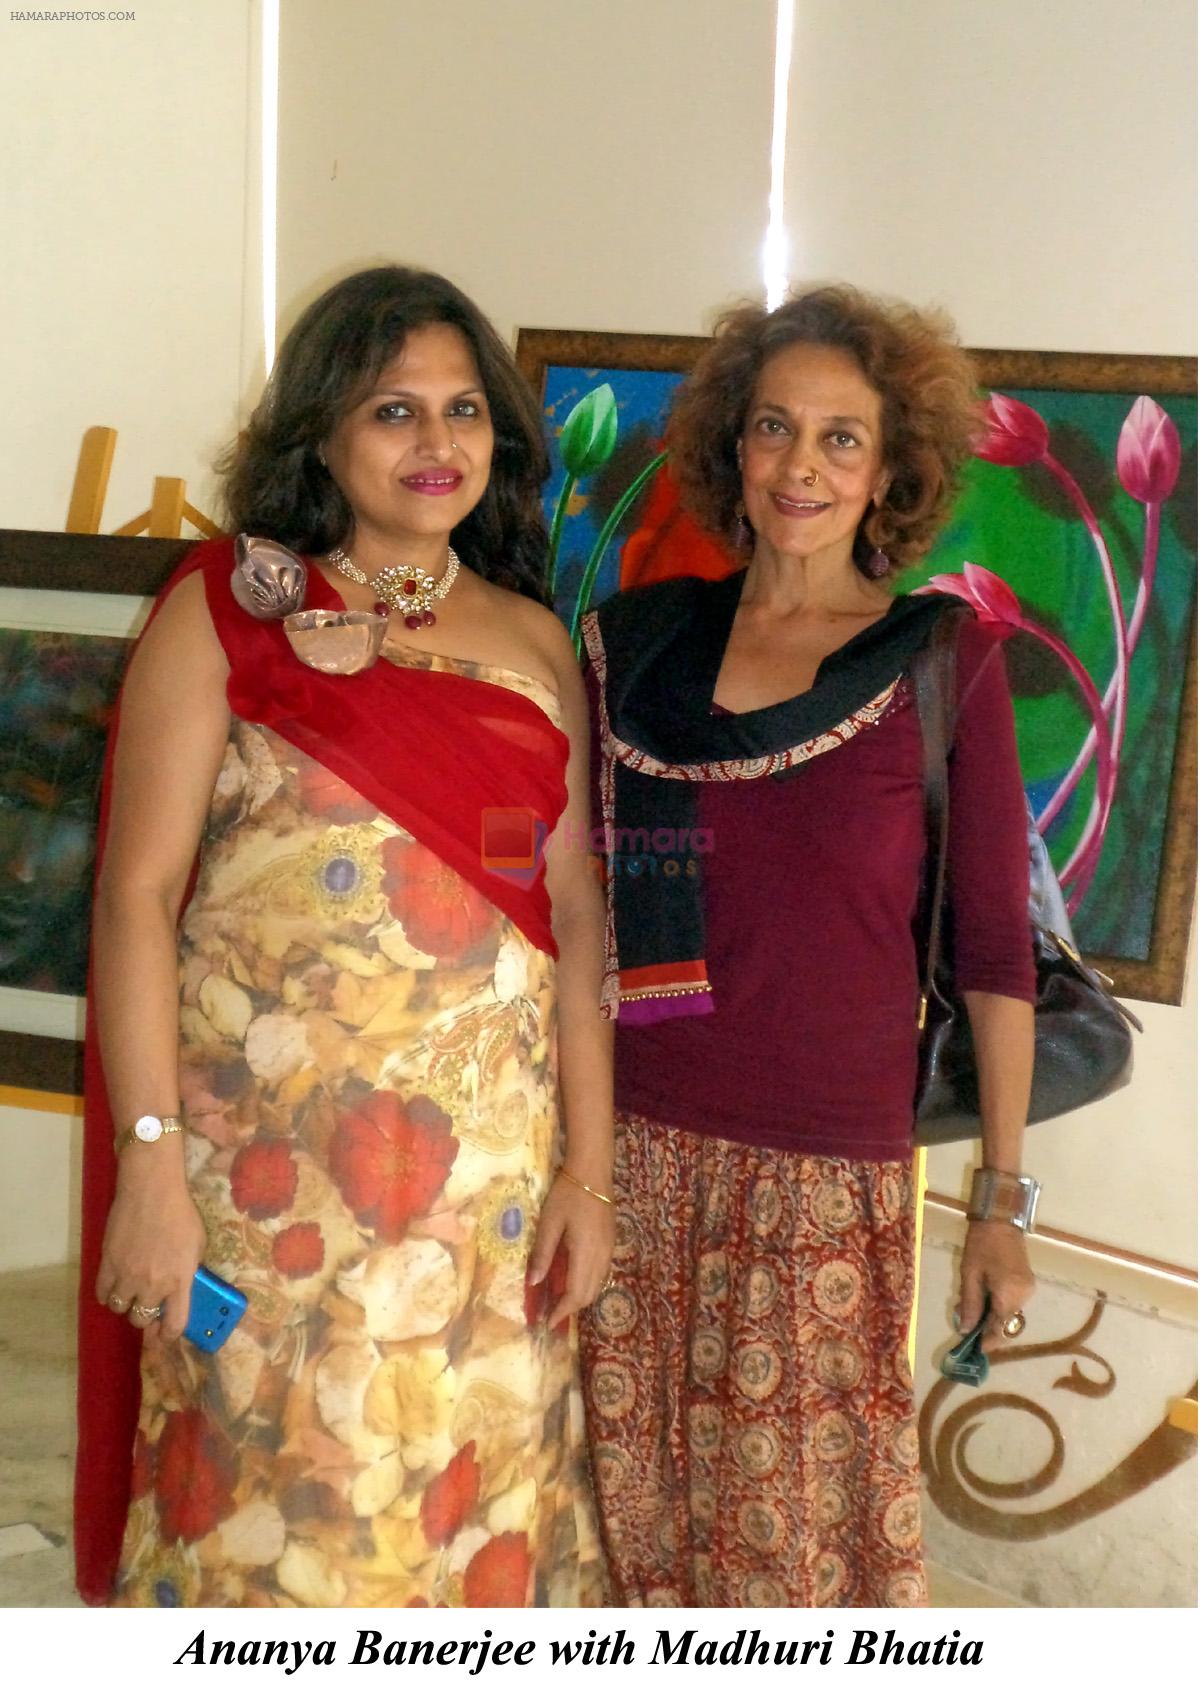 Ananya BAnerjee with Madhuri Bhatia at the Art and Fashion Brunch in The Wedding Cafe n Lounge on 22nd Jan 2012